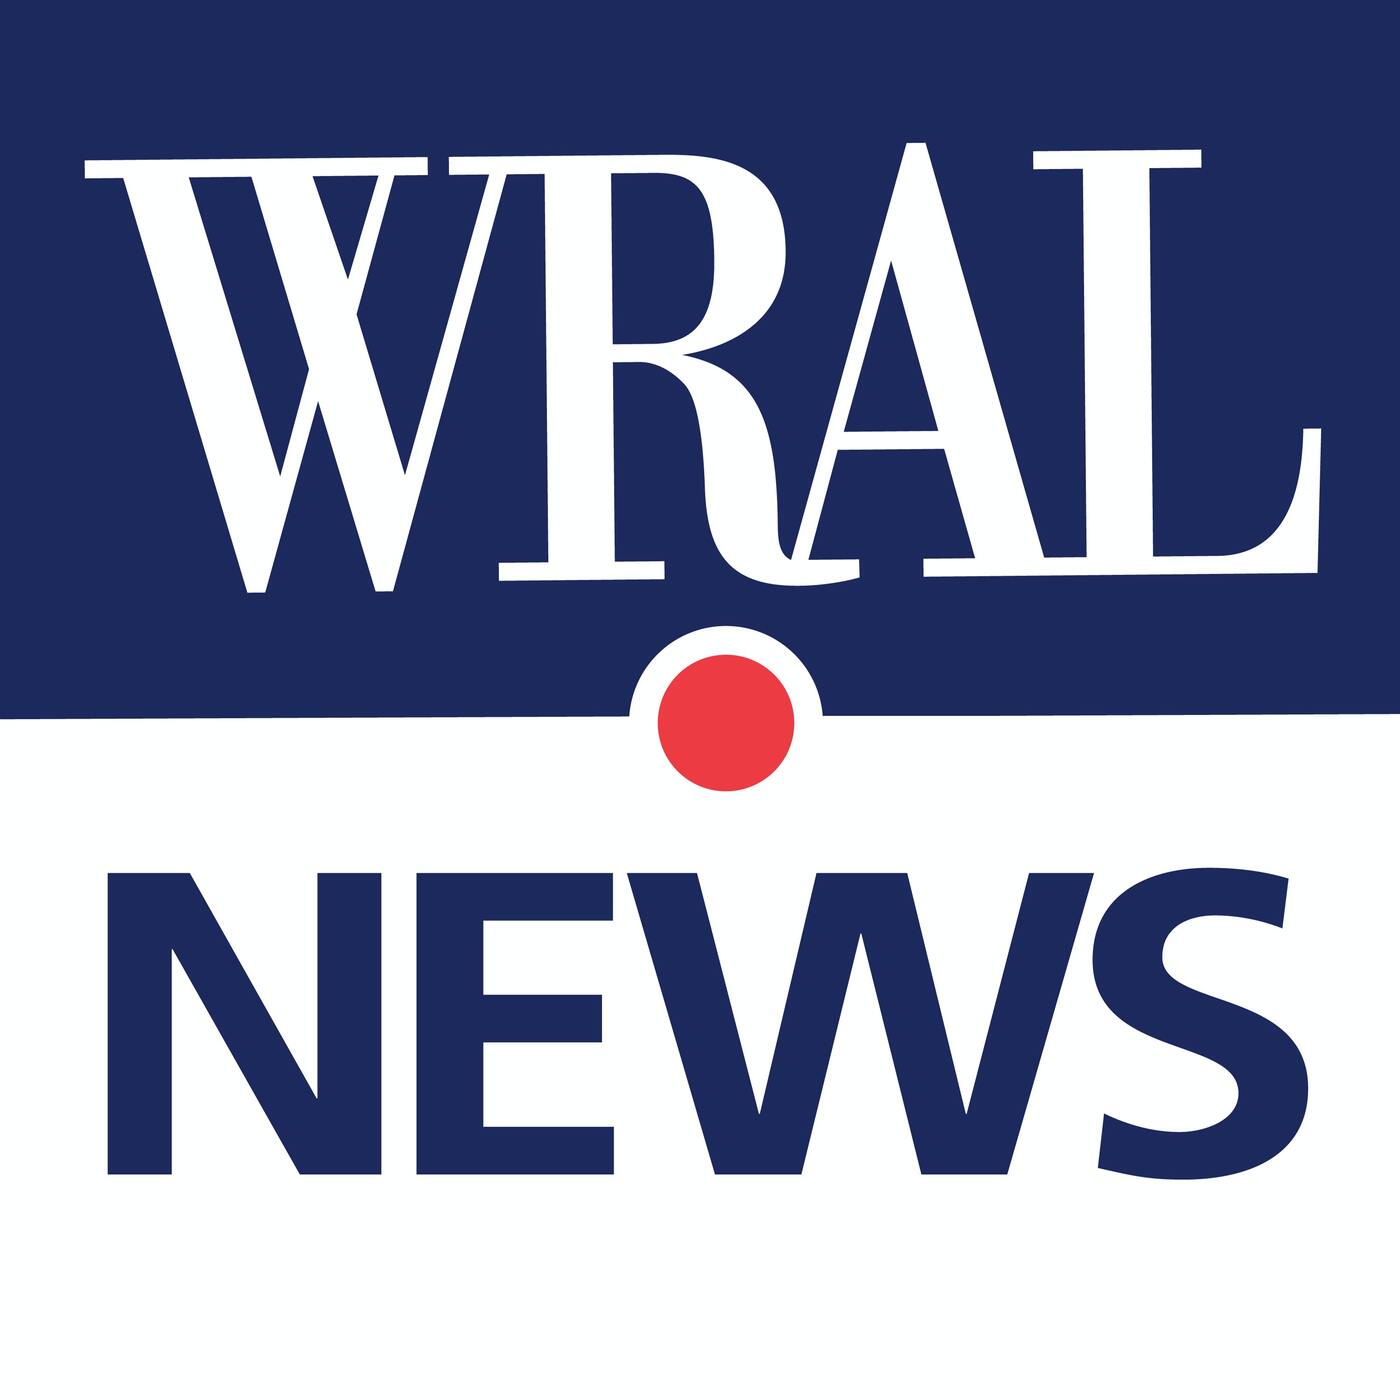 8AM News on WRAL - Monday, May 20, 2024